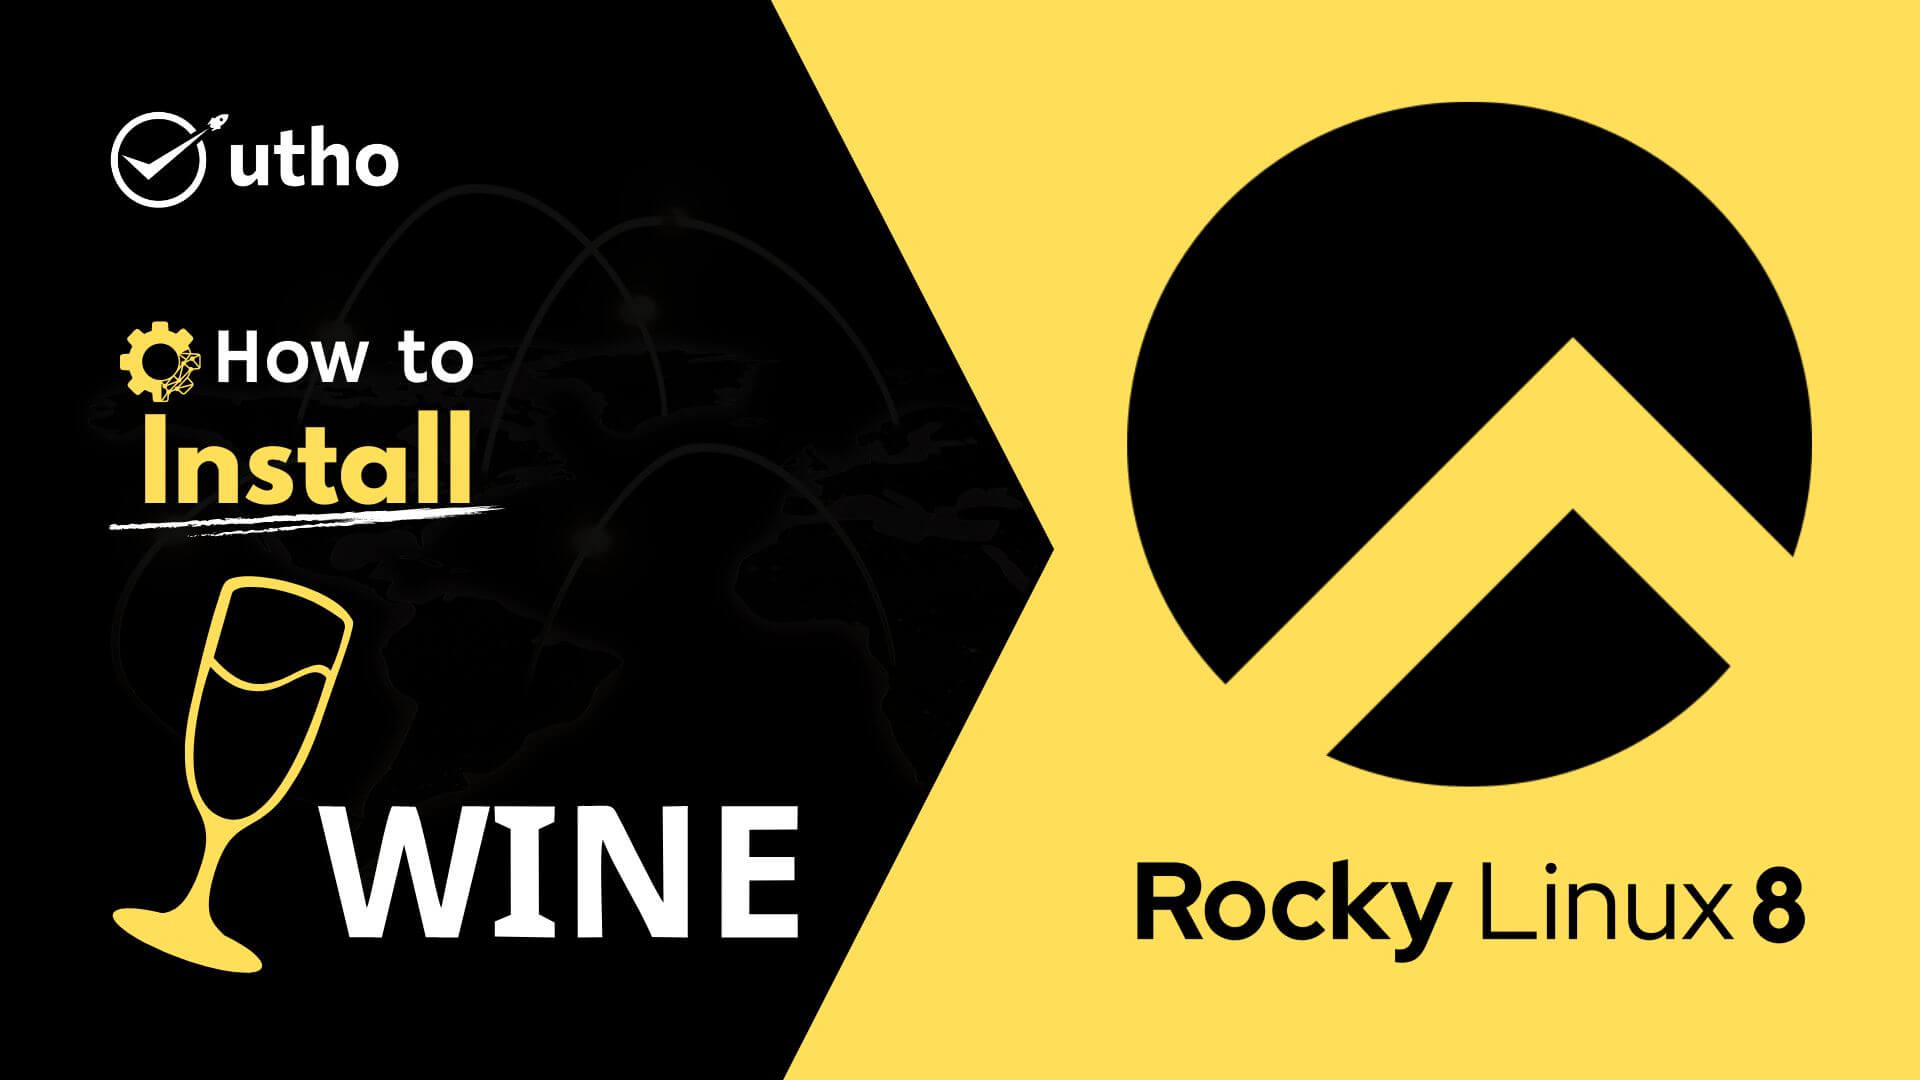 How to install Wine on RockyLinux 8